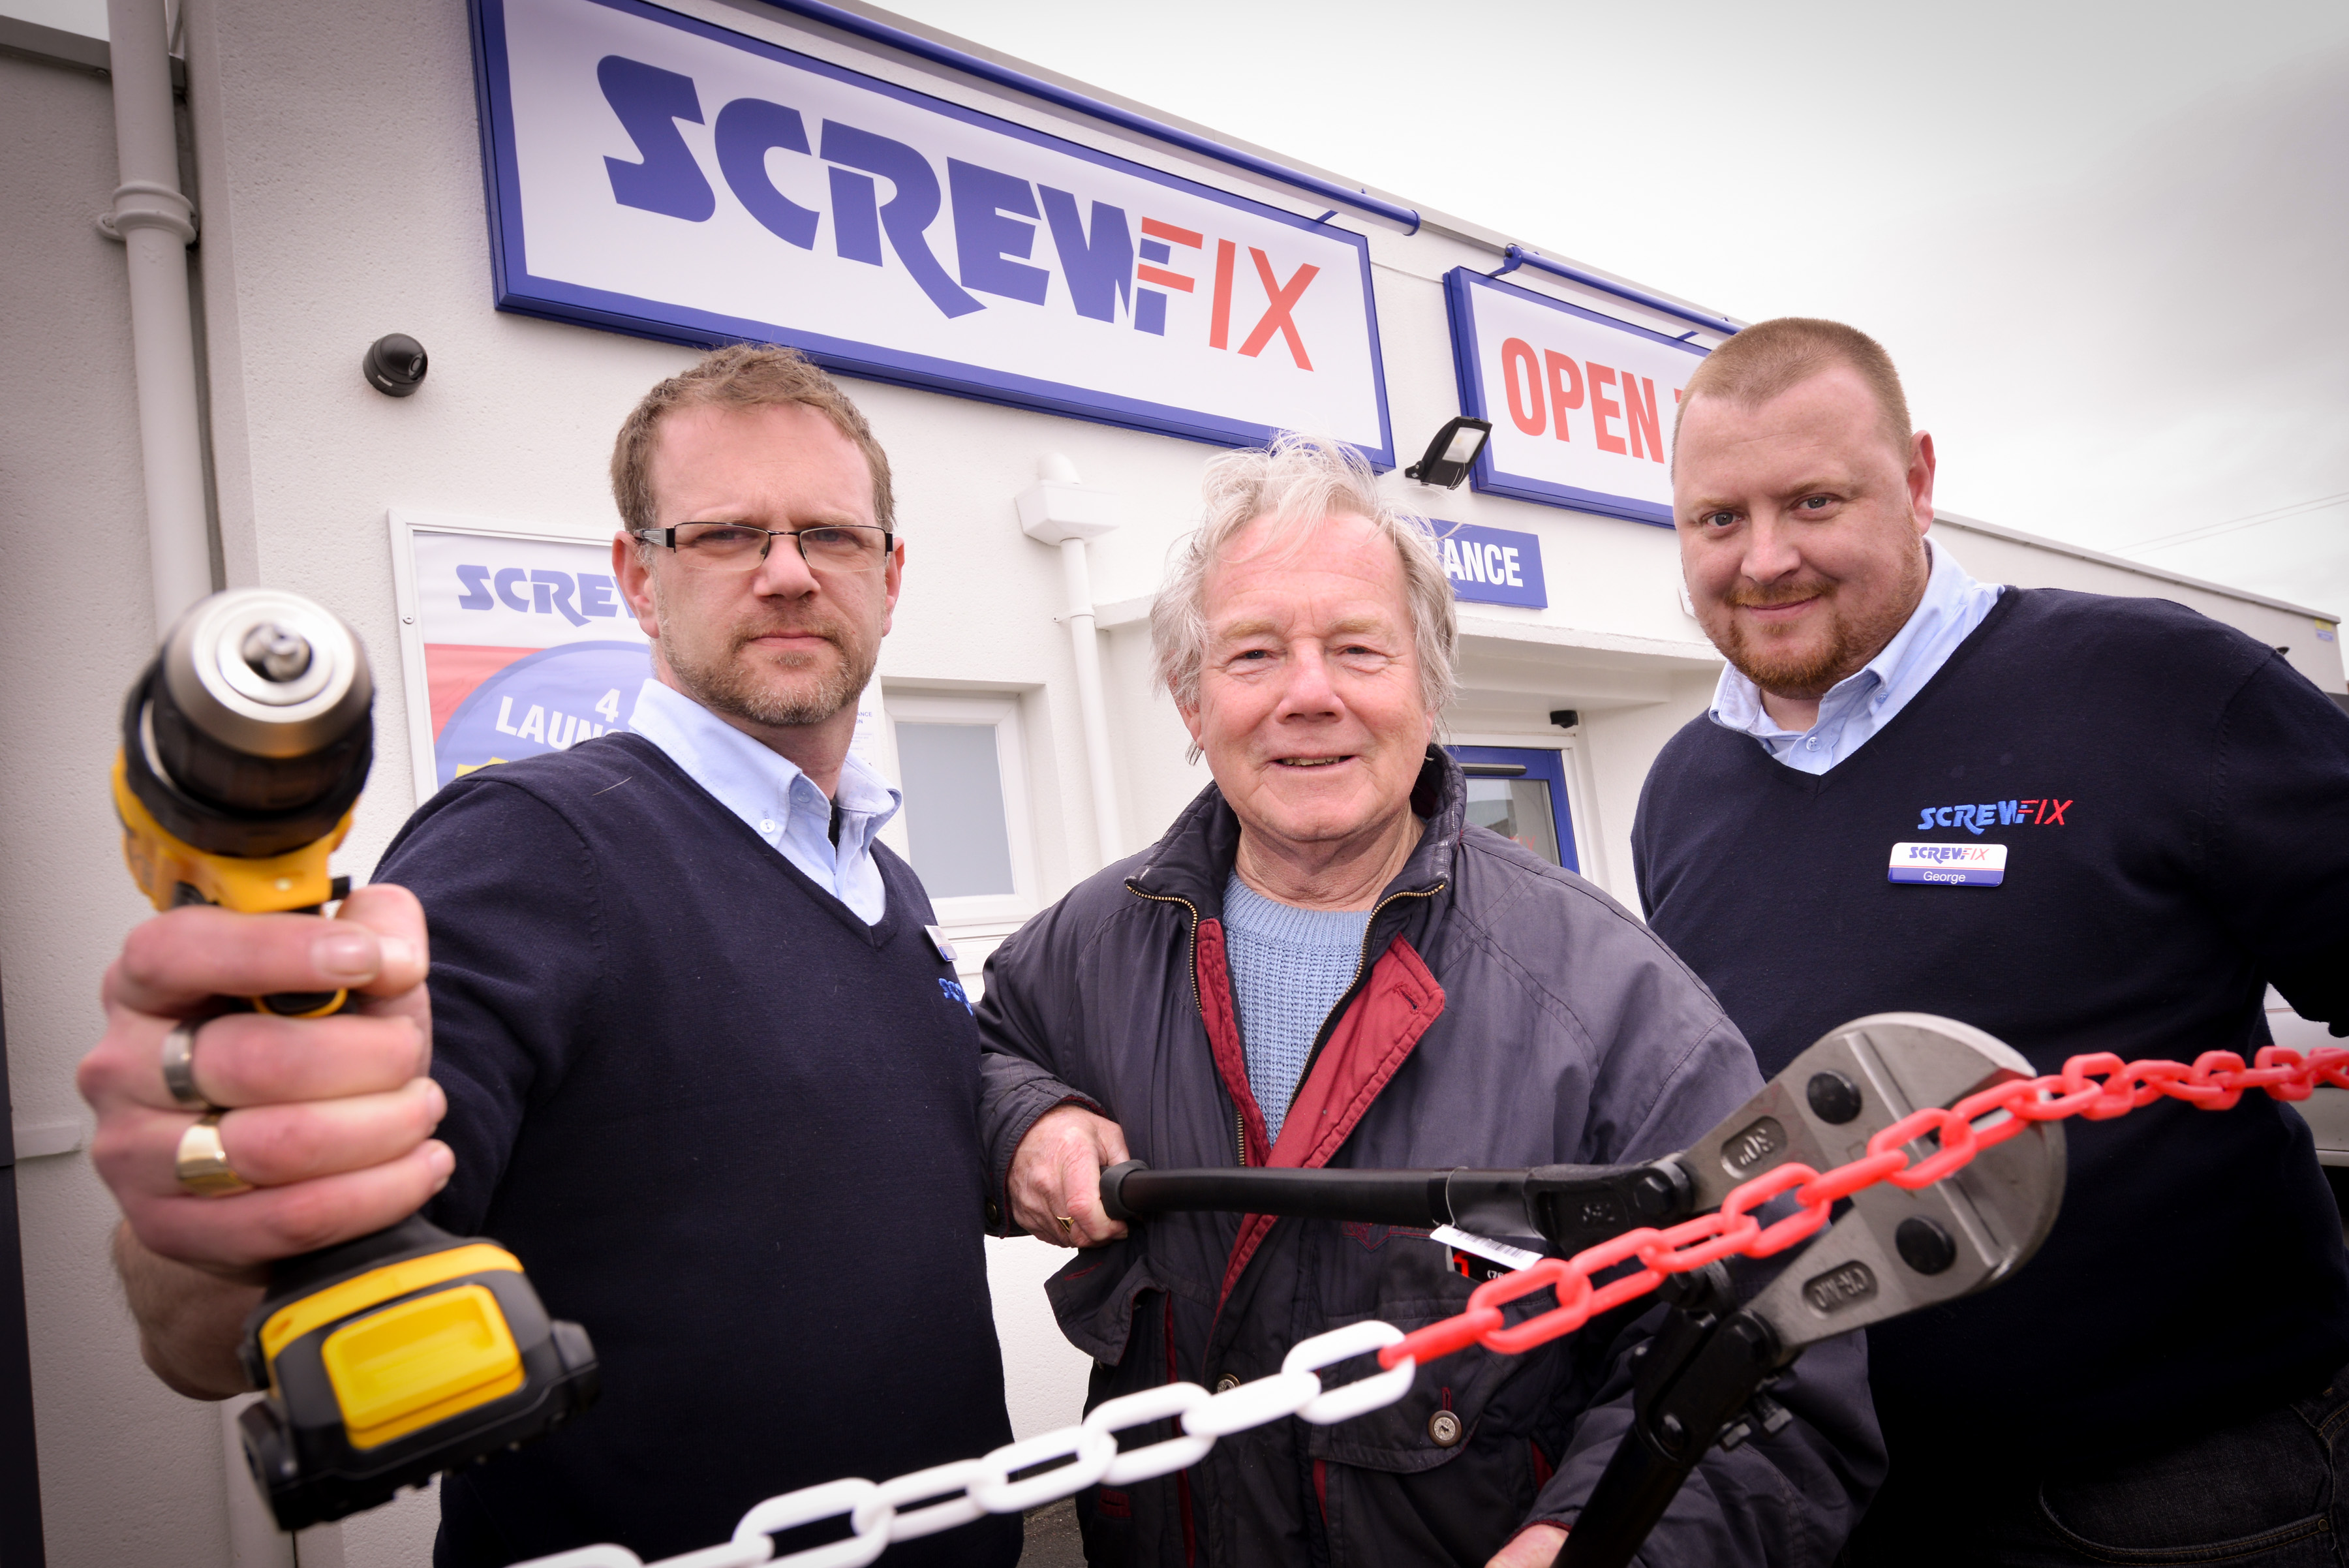 Blackpool’s second Screwfix store to open on 16 April